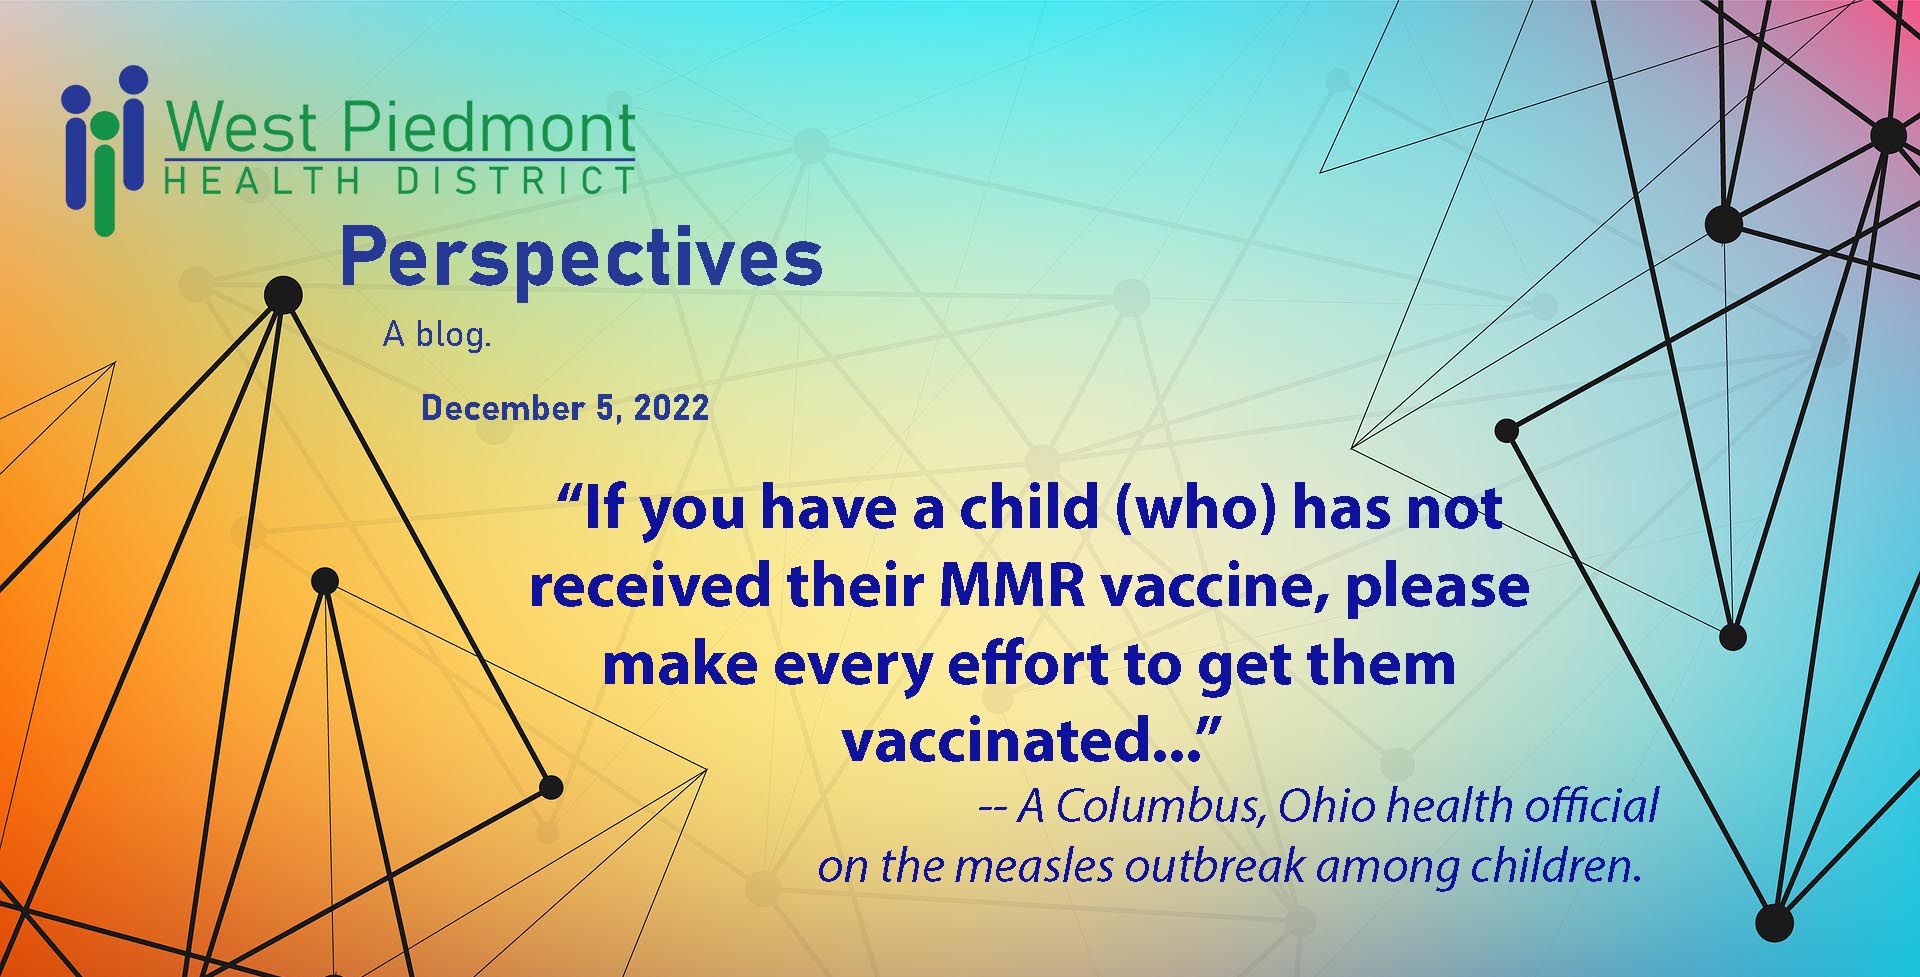 Perspectives cover with quote: “If you have a child (who) has not received their MMR vaccine, please make every effort to get them vaccinated...” -- A Columbus, Ohio health official on the measles outbreak among children.